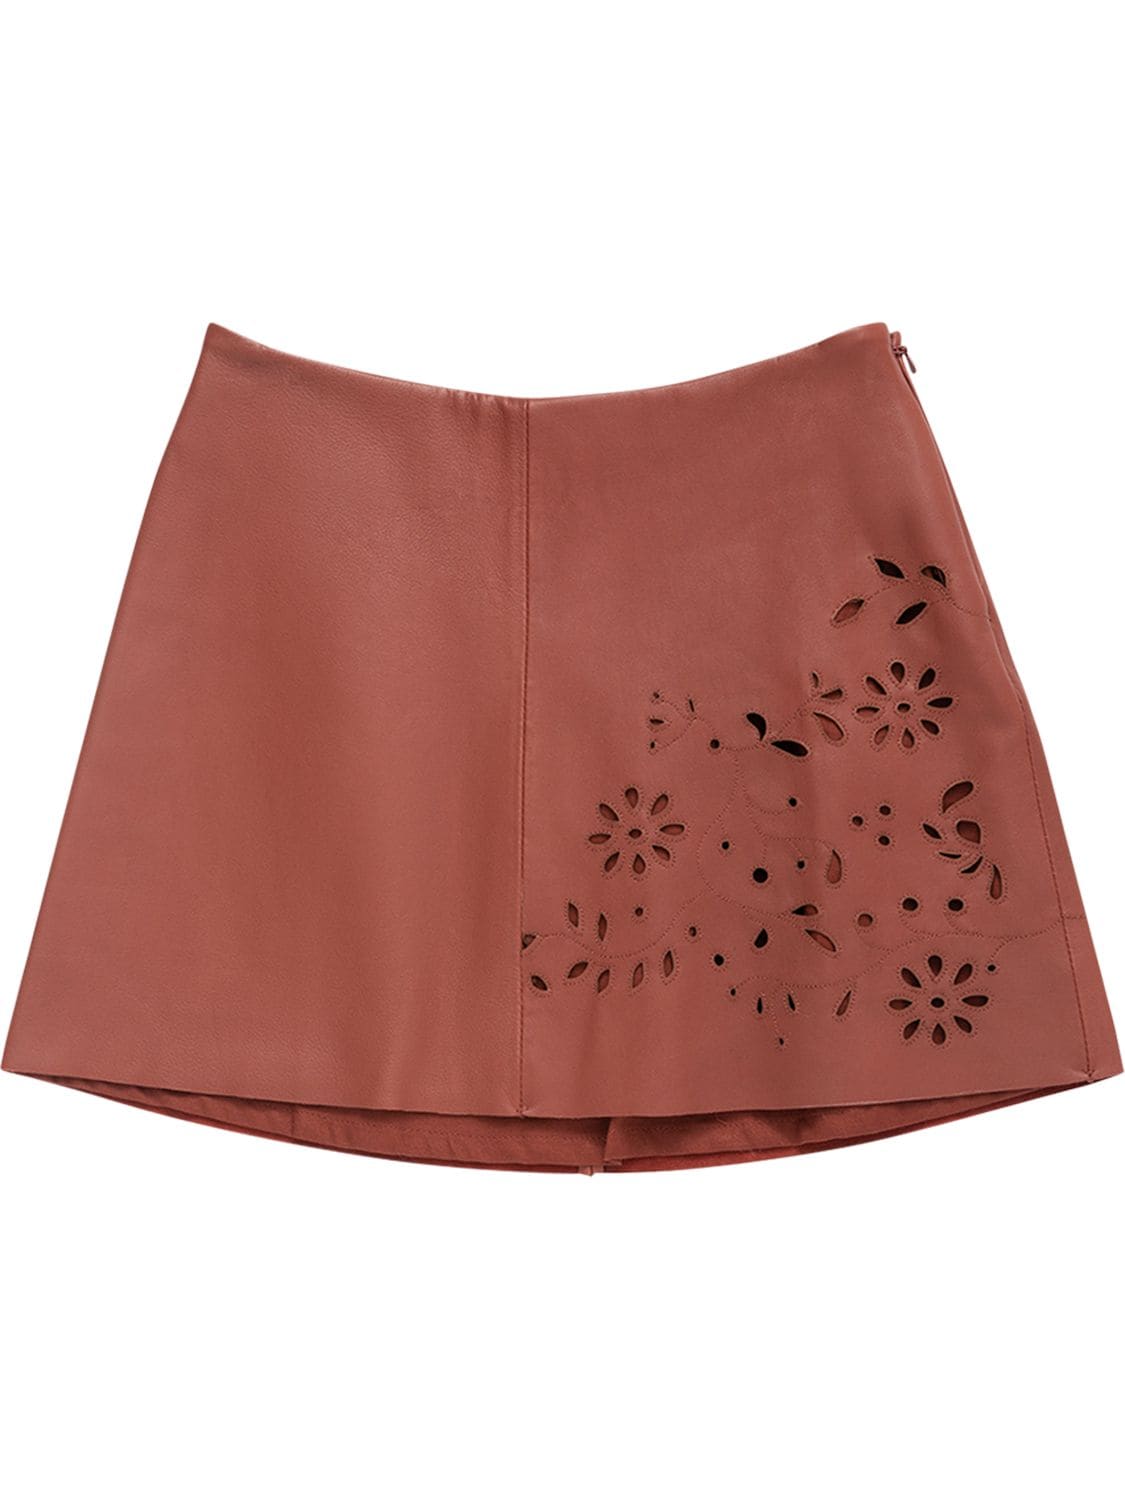 Image of Embroidered Leather Skirt